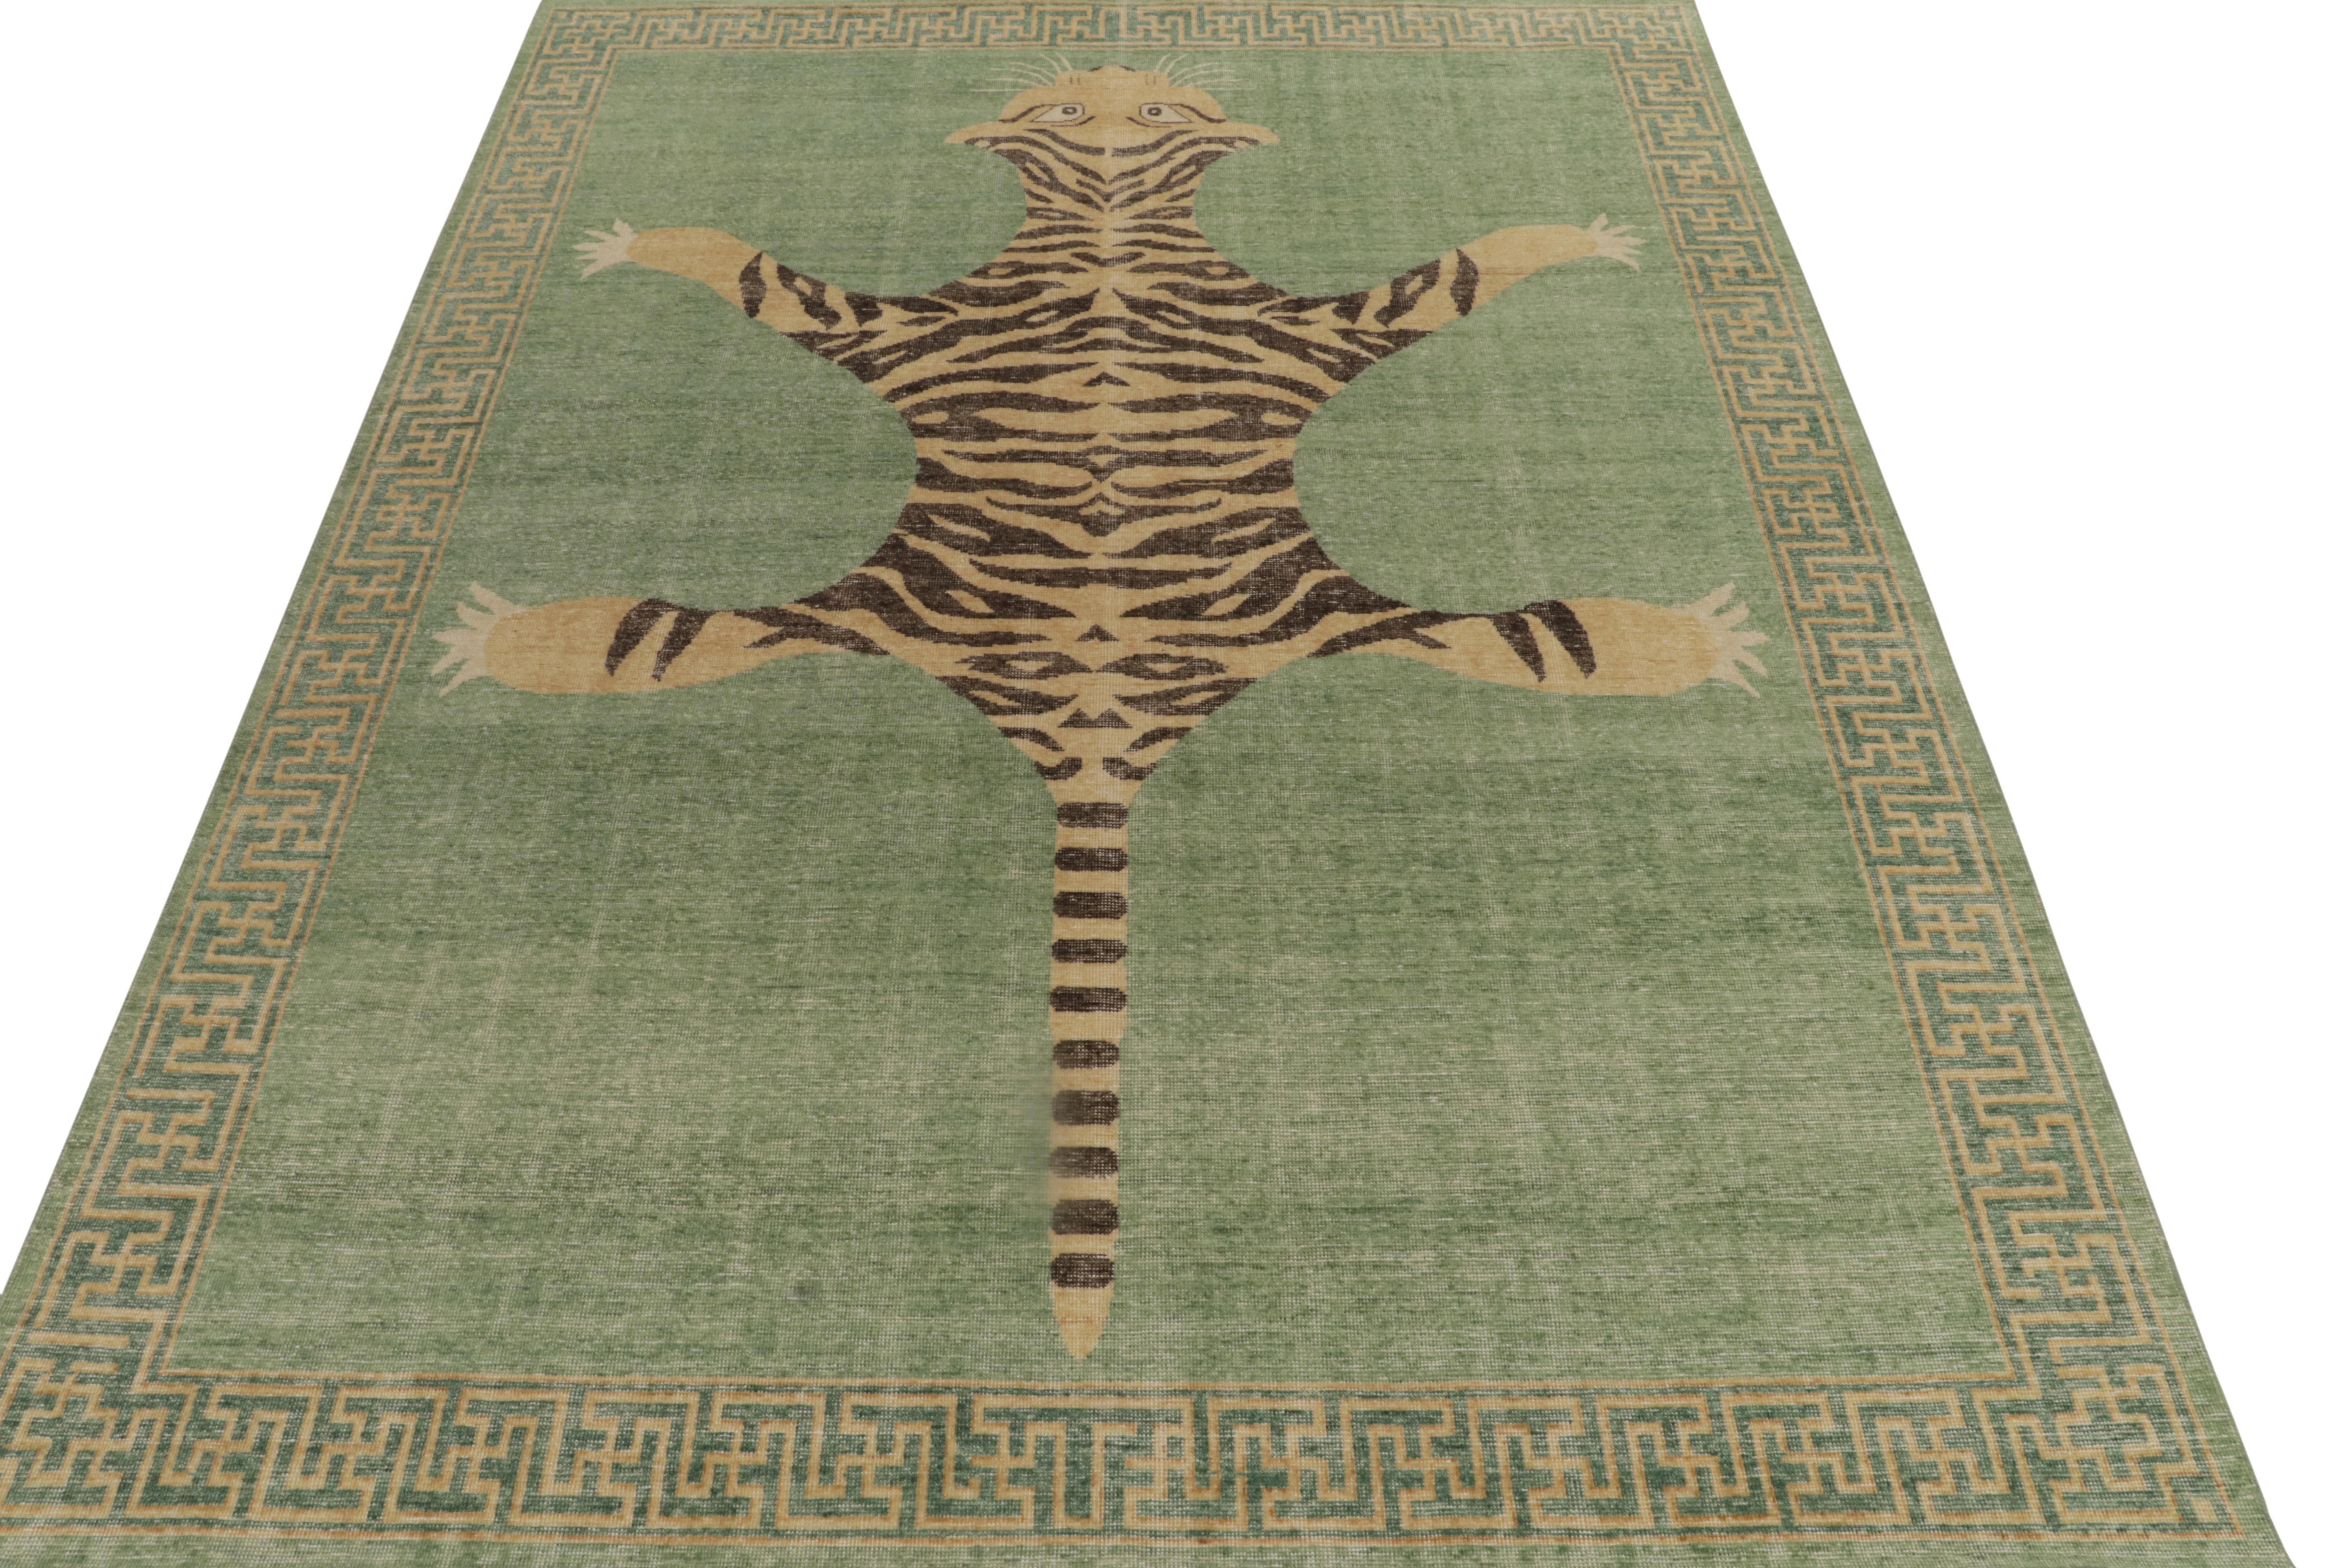 Other Rug & Kilim’s Distressed Tiger Skin Style Rug in Green, Beige & Black Pictorial For Sale